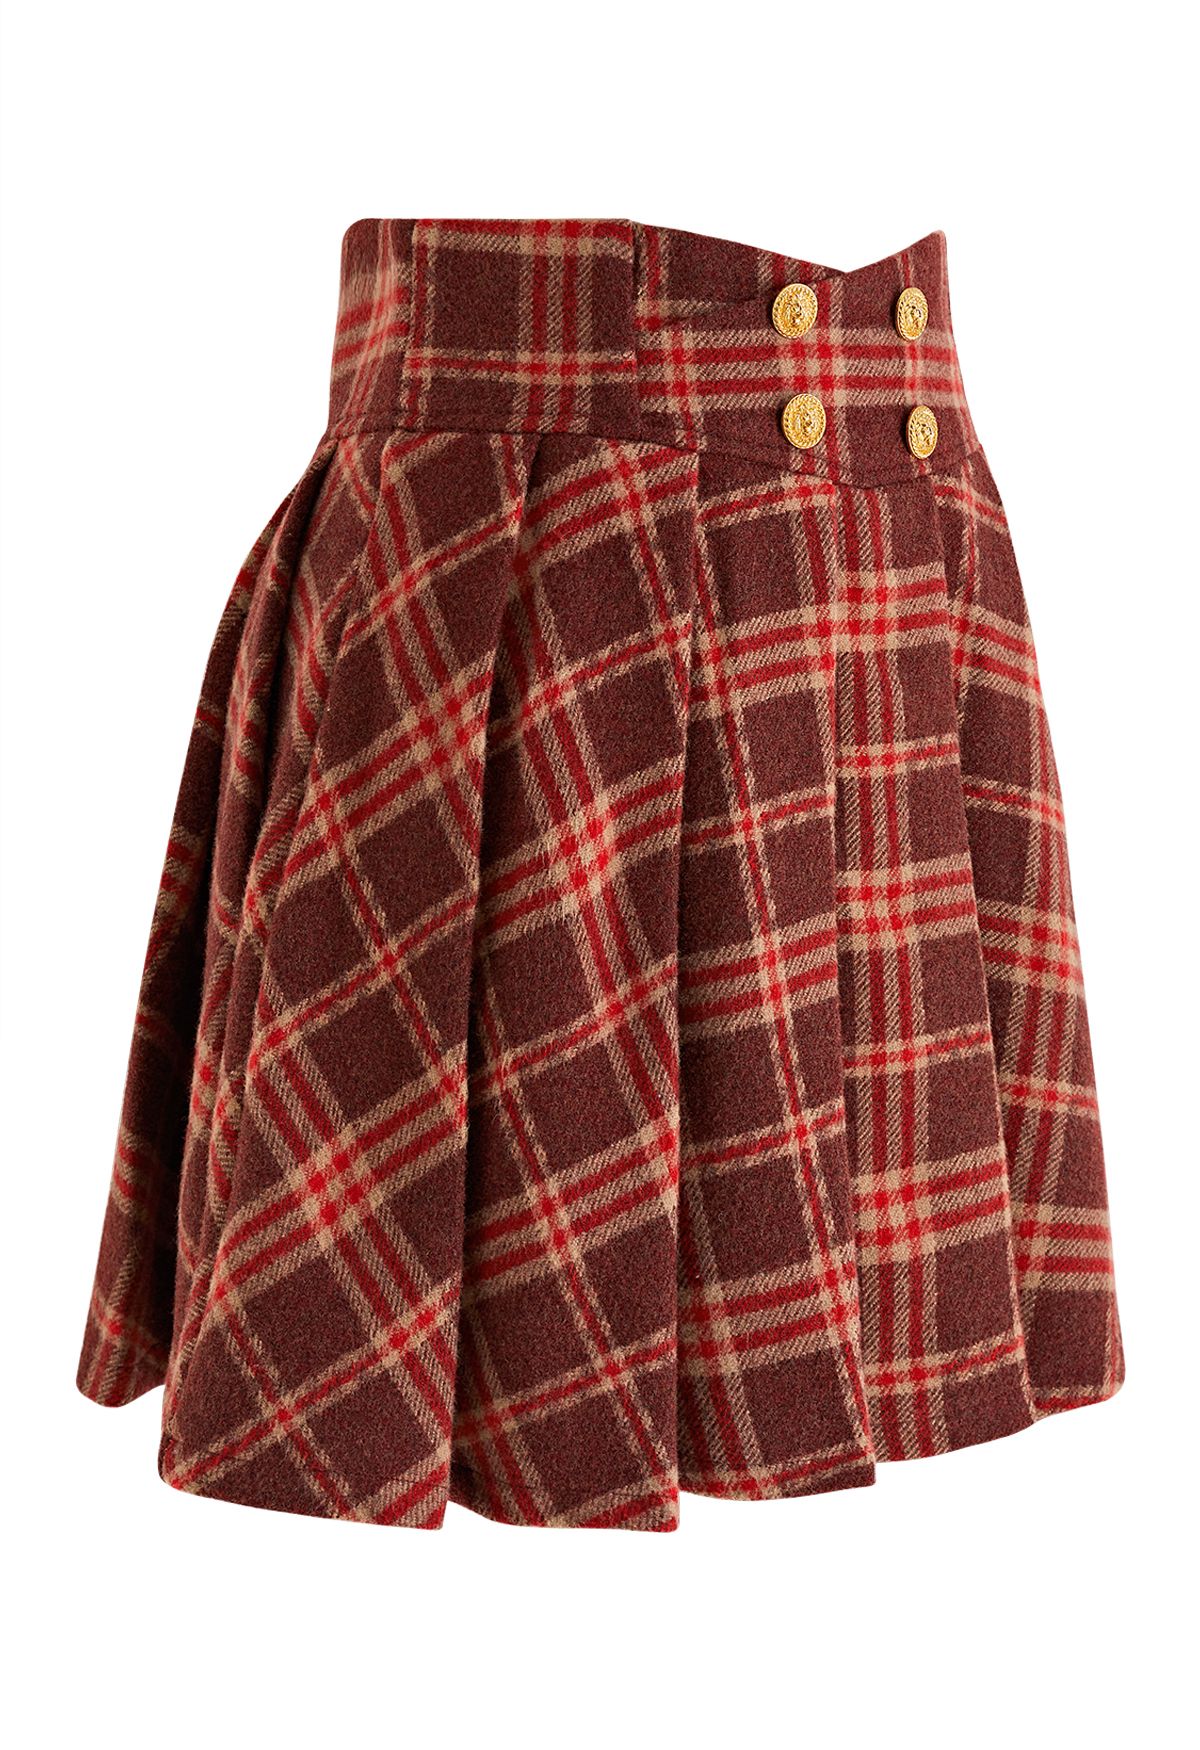 Golden Button Pleated Flare Mini Skirt in Red Plaid